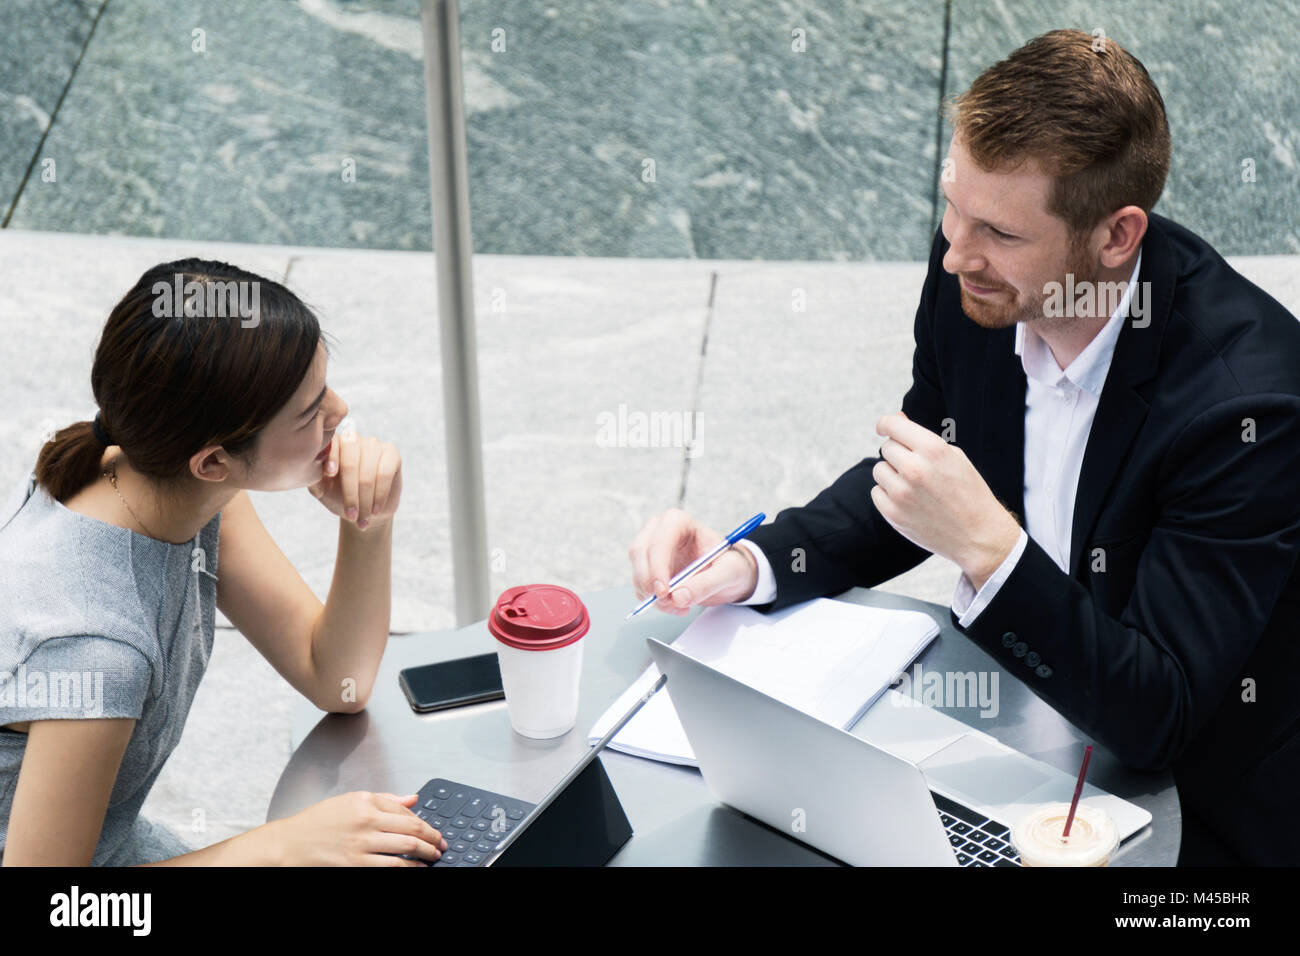 Young businessman and woman with laptops meeting at sidewalk cafe Stock Photo